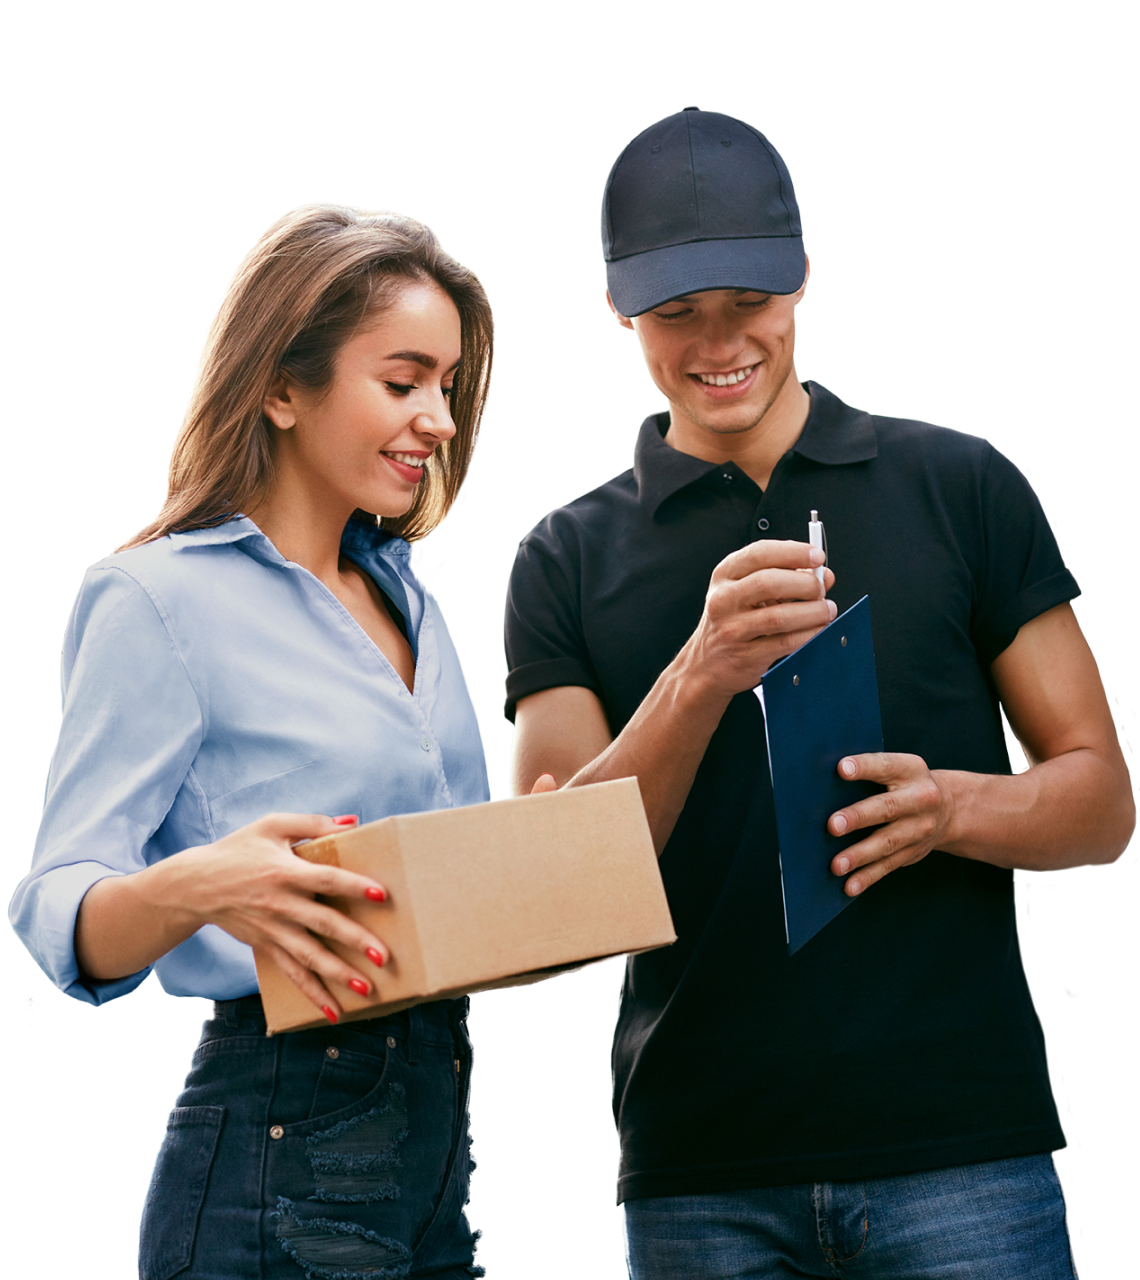 Fastest next day delivery in India - experienced couriers - borzo delivery